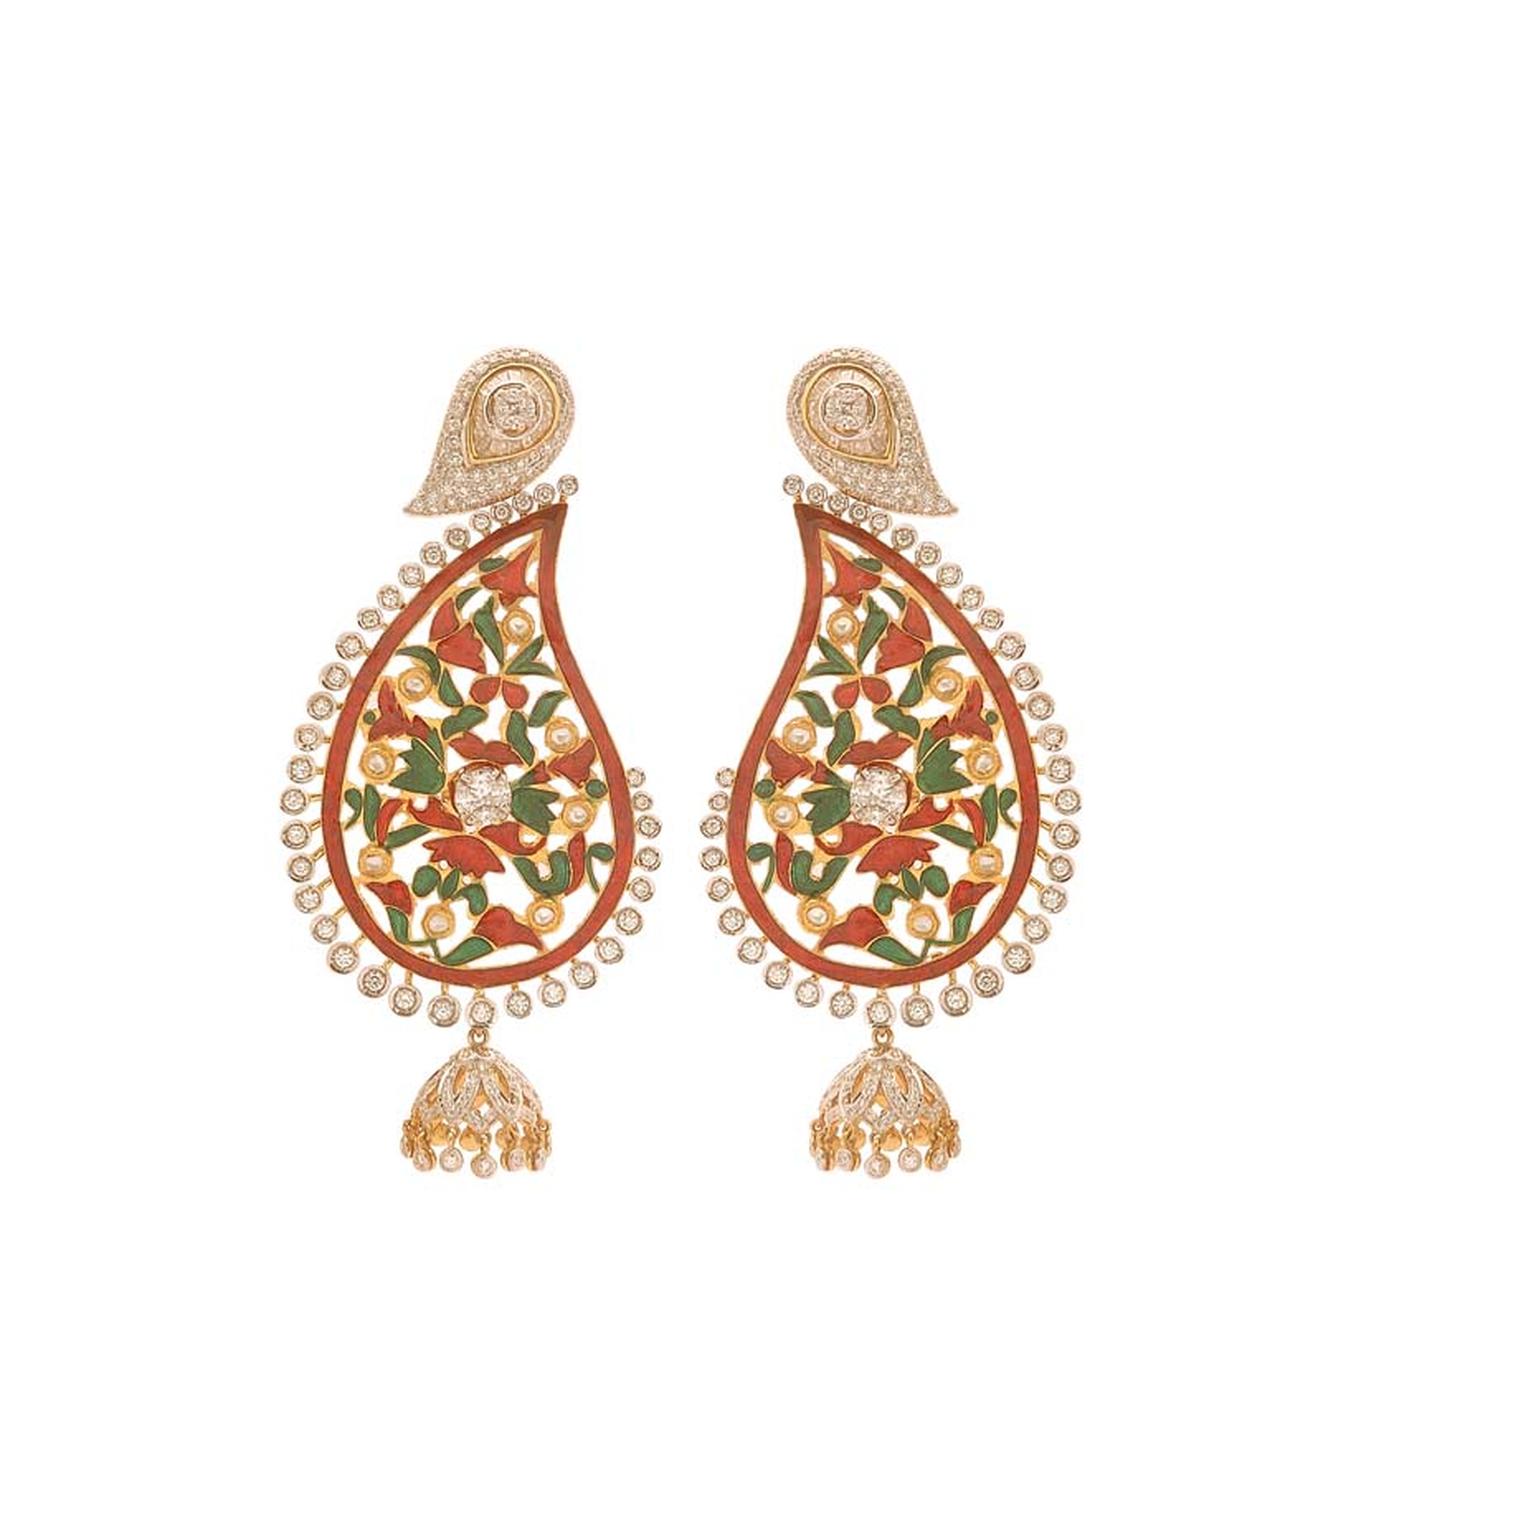 Anmol Paisley enamelled earrings set with baguette, princess, marquise and round brilliant diamonds.